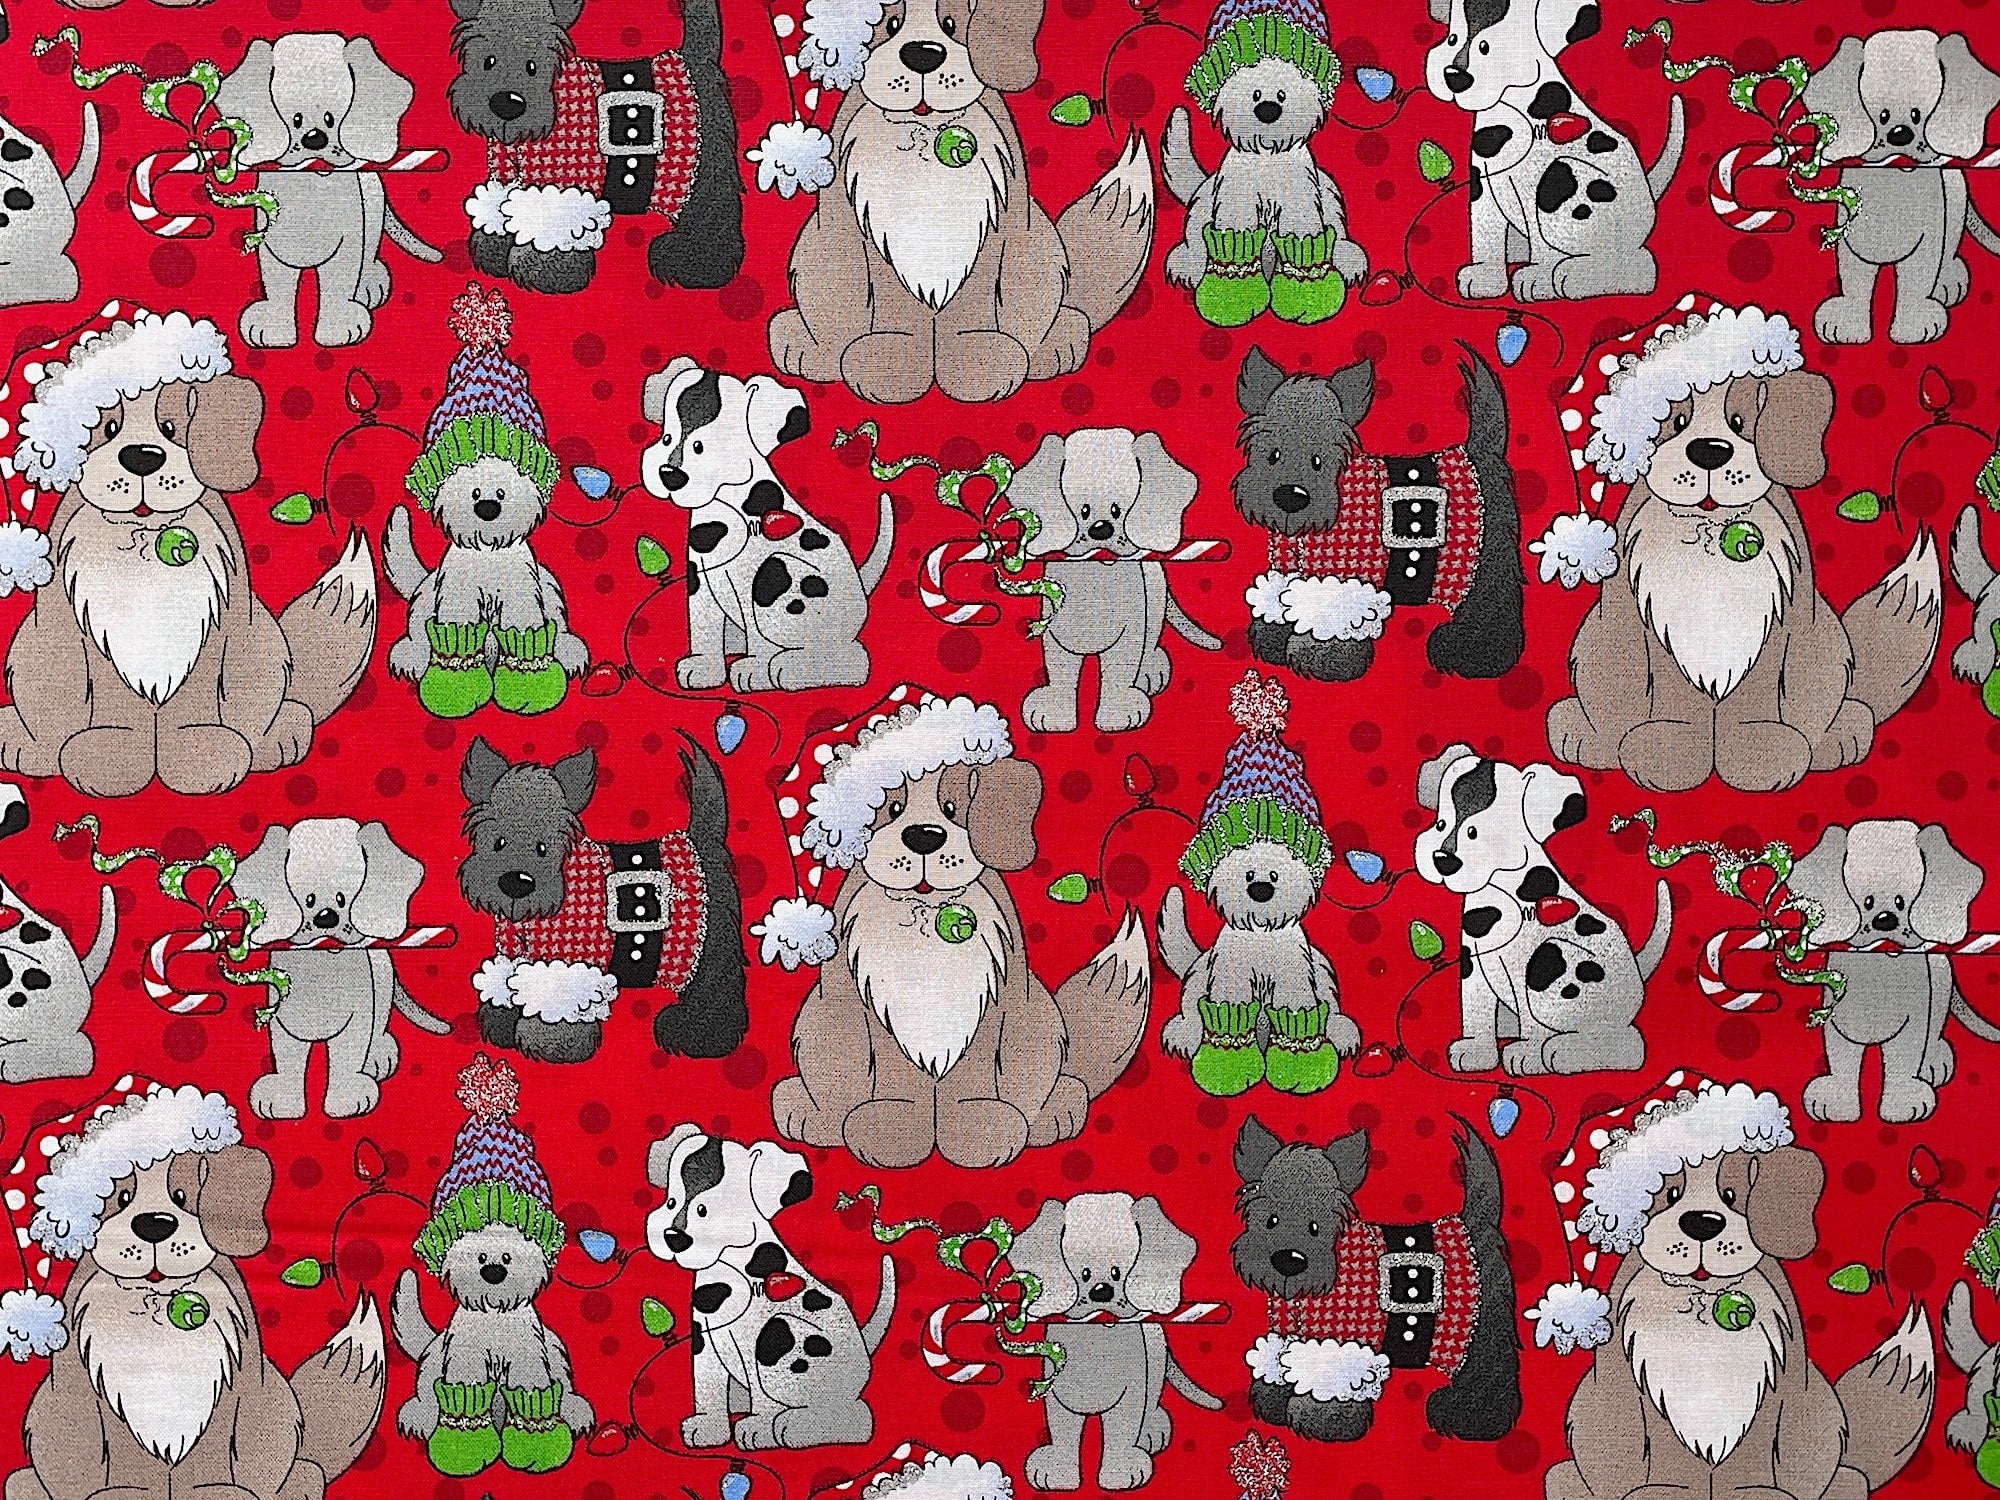 Here is an adorable Christmas themed dog fabric. It has cute small and large dogs with some wearing Xmas hats and holding a string of Christmas lights in their mouth. The Scottie dog wearing a red and gray check sweater, and the gray puppy has a candy cane in his mouth.